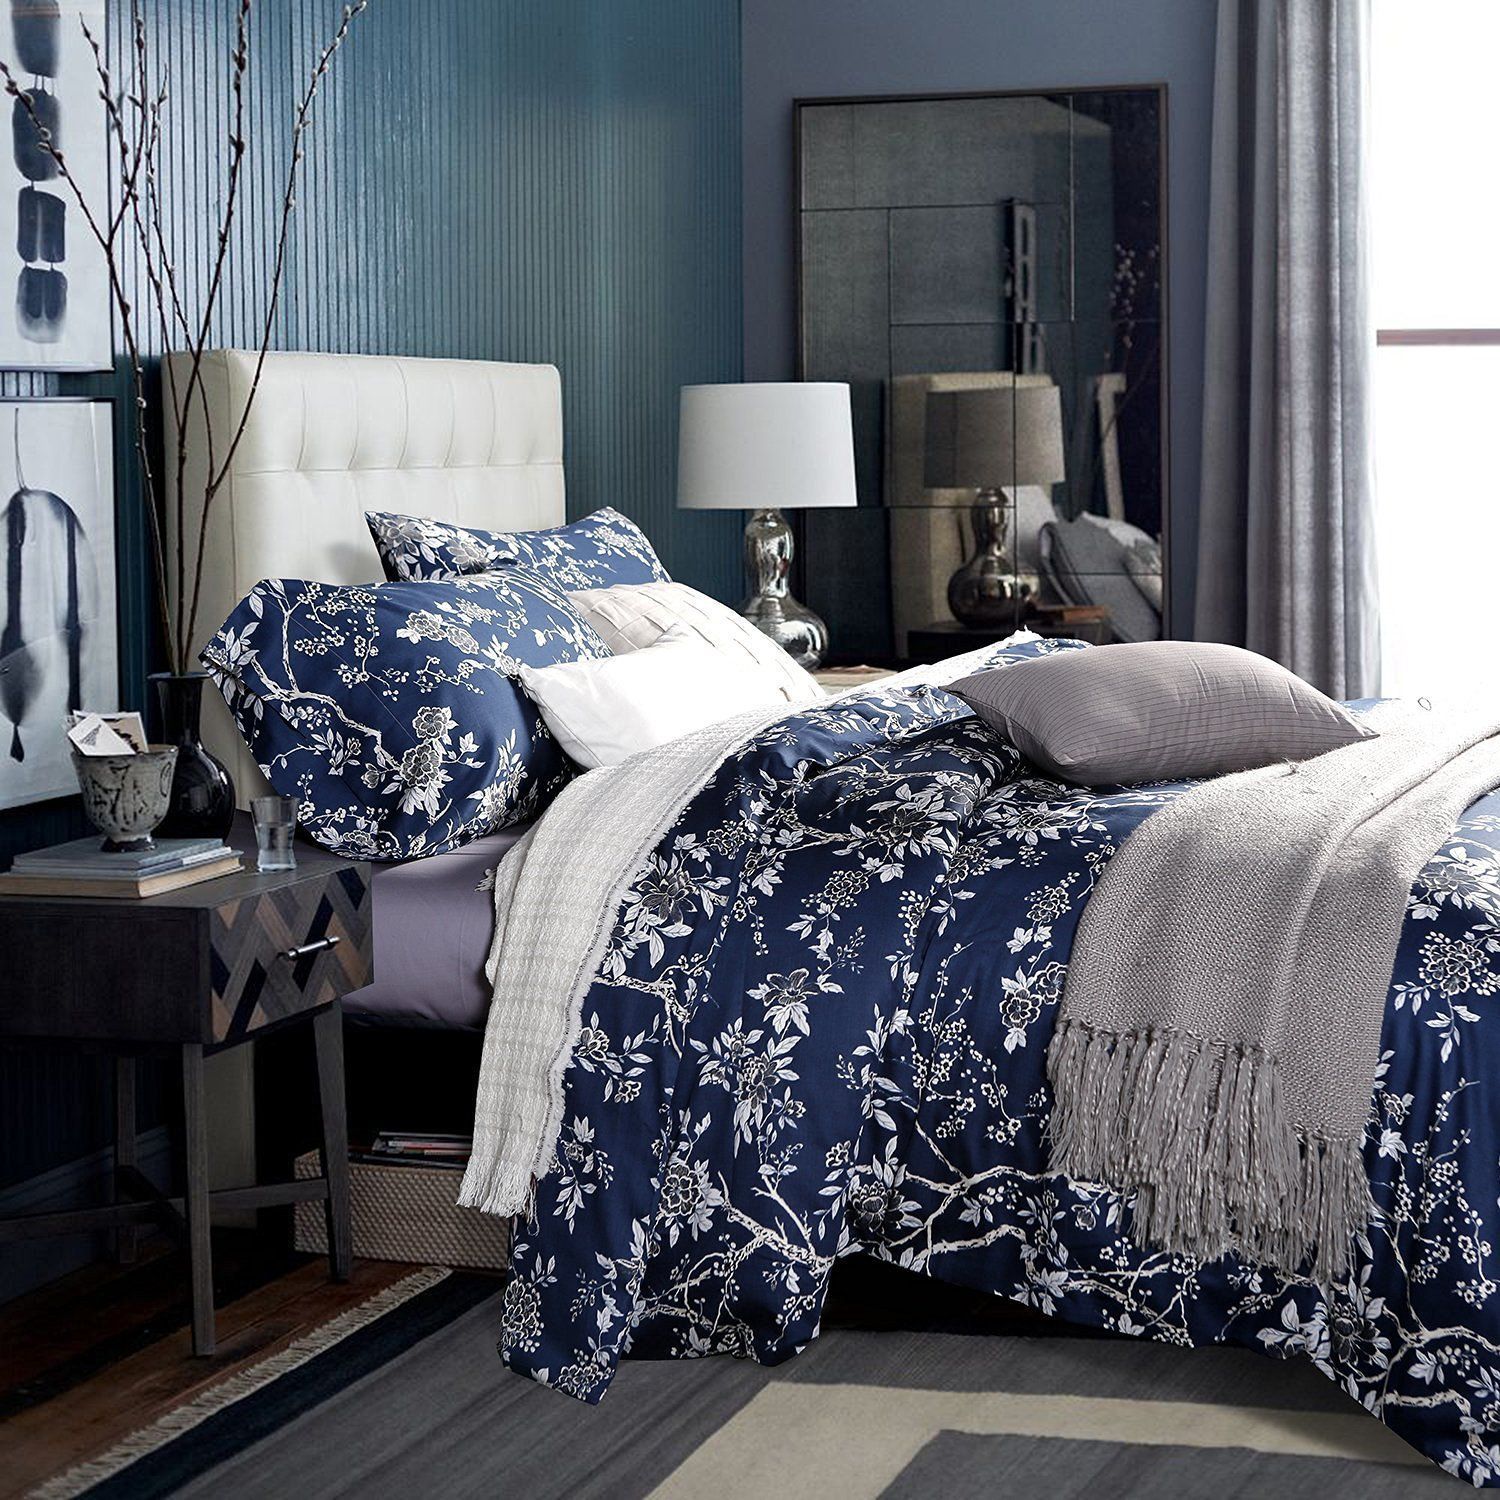 Highlander reccomend Quality asian style bedding sets